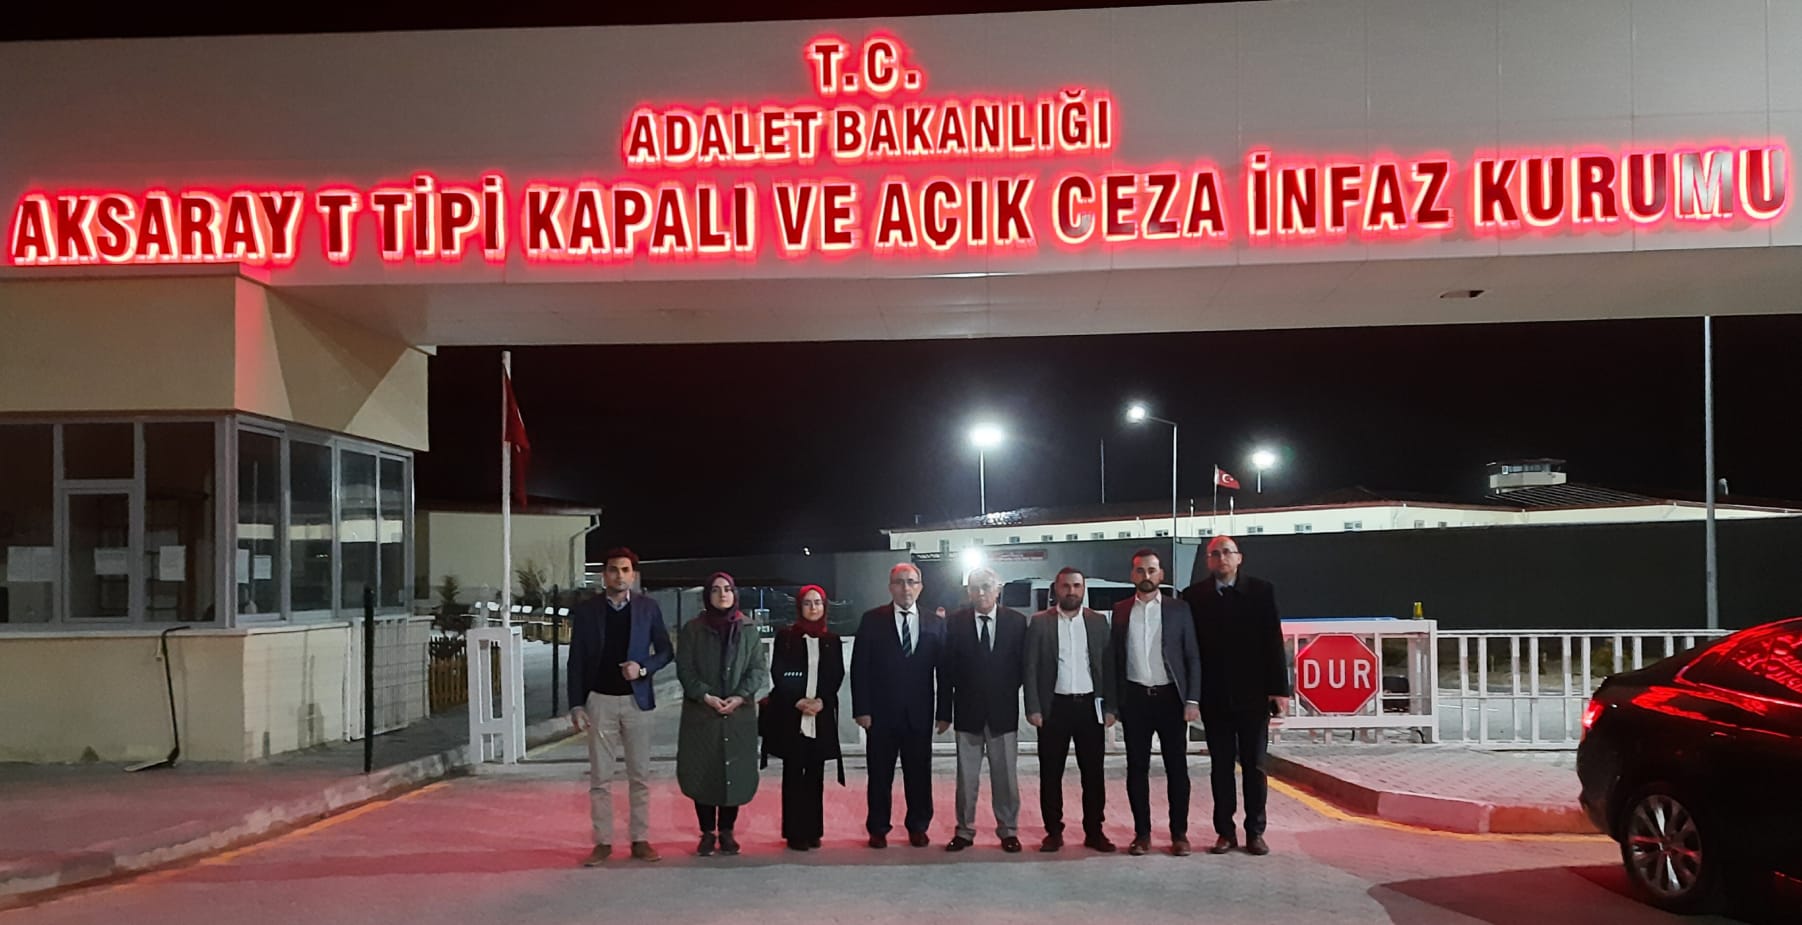 Visit to Aksaray T Type Closed Penitentiary Institution